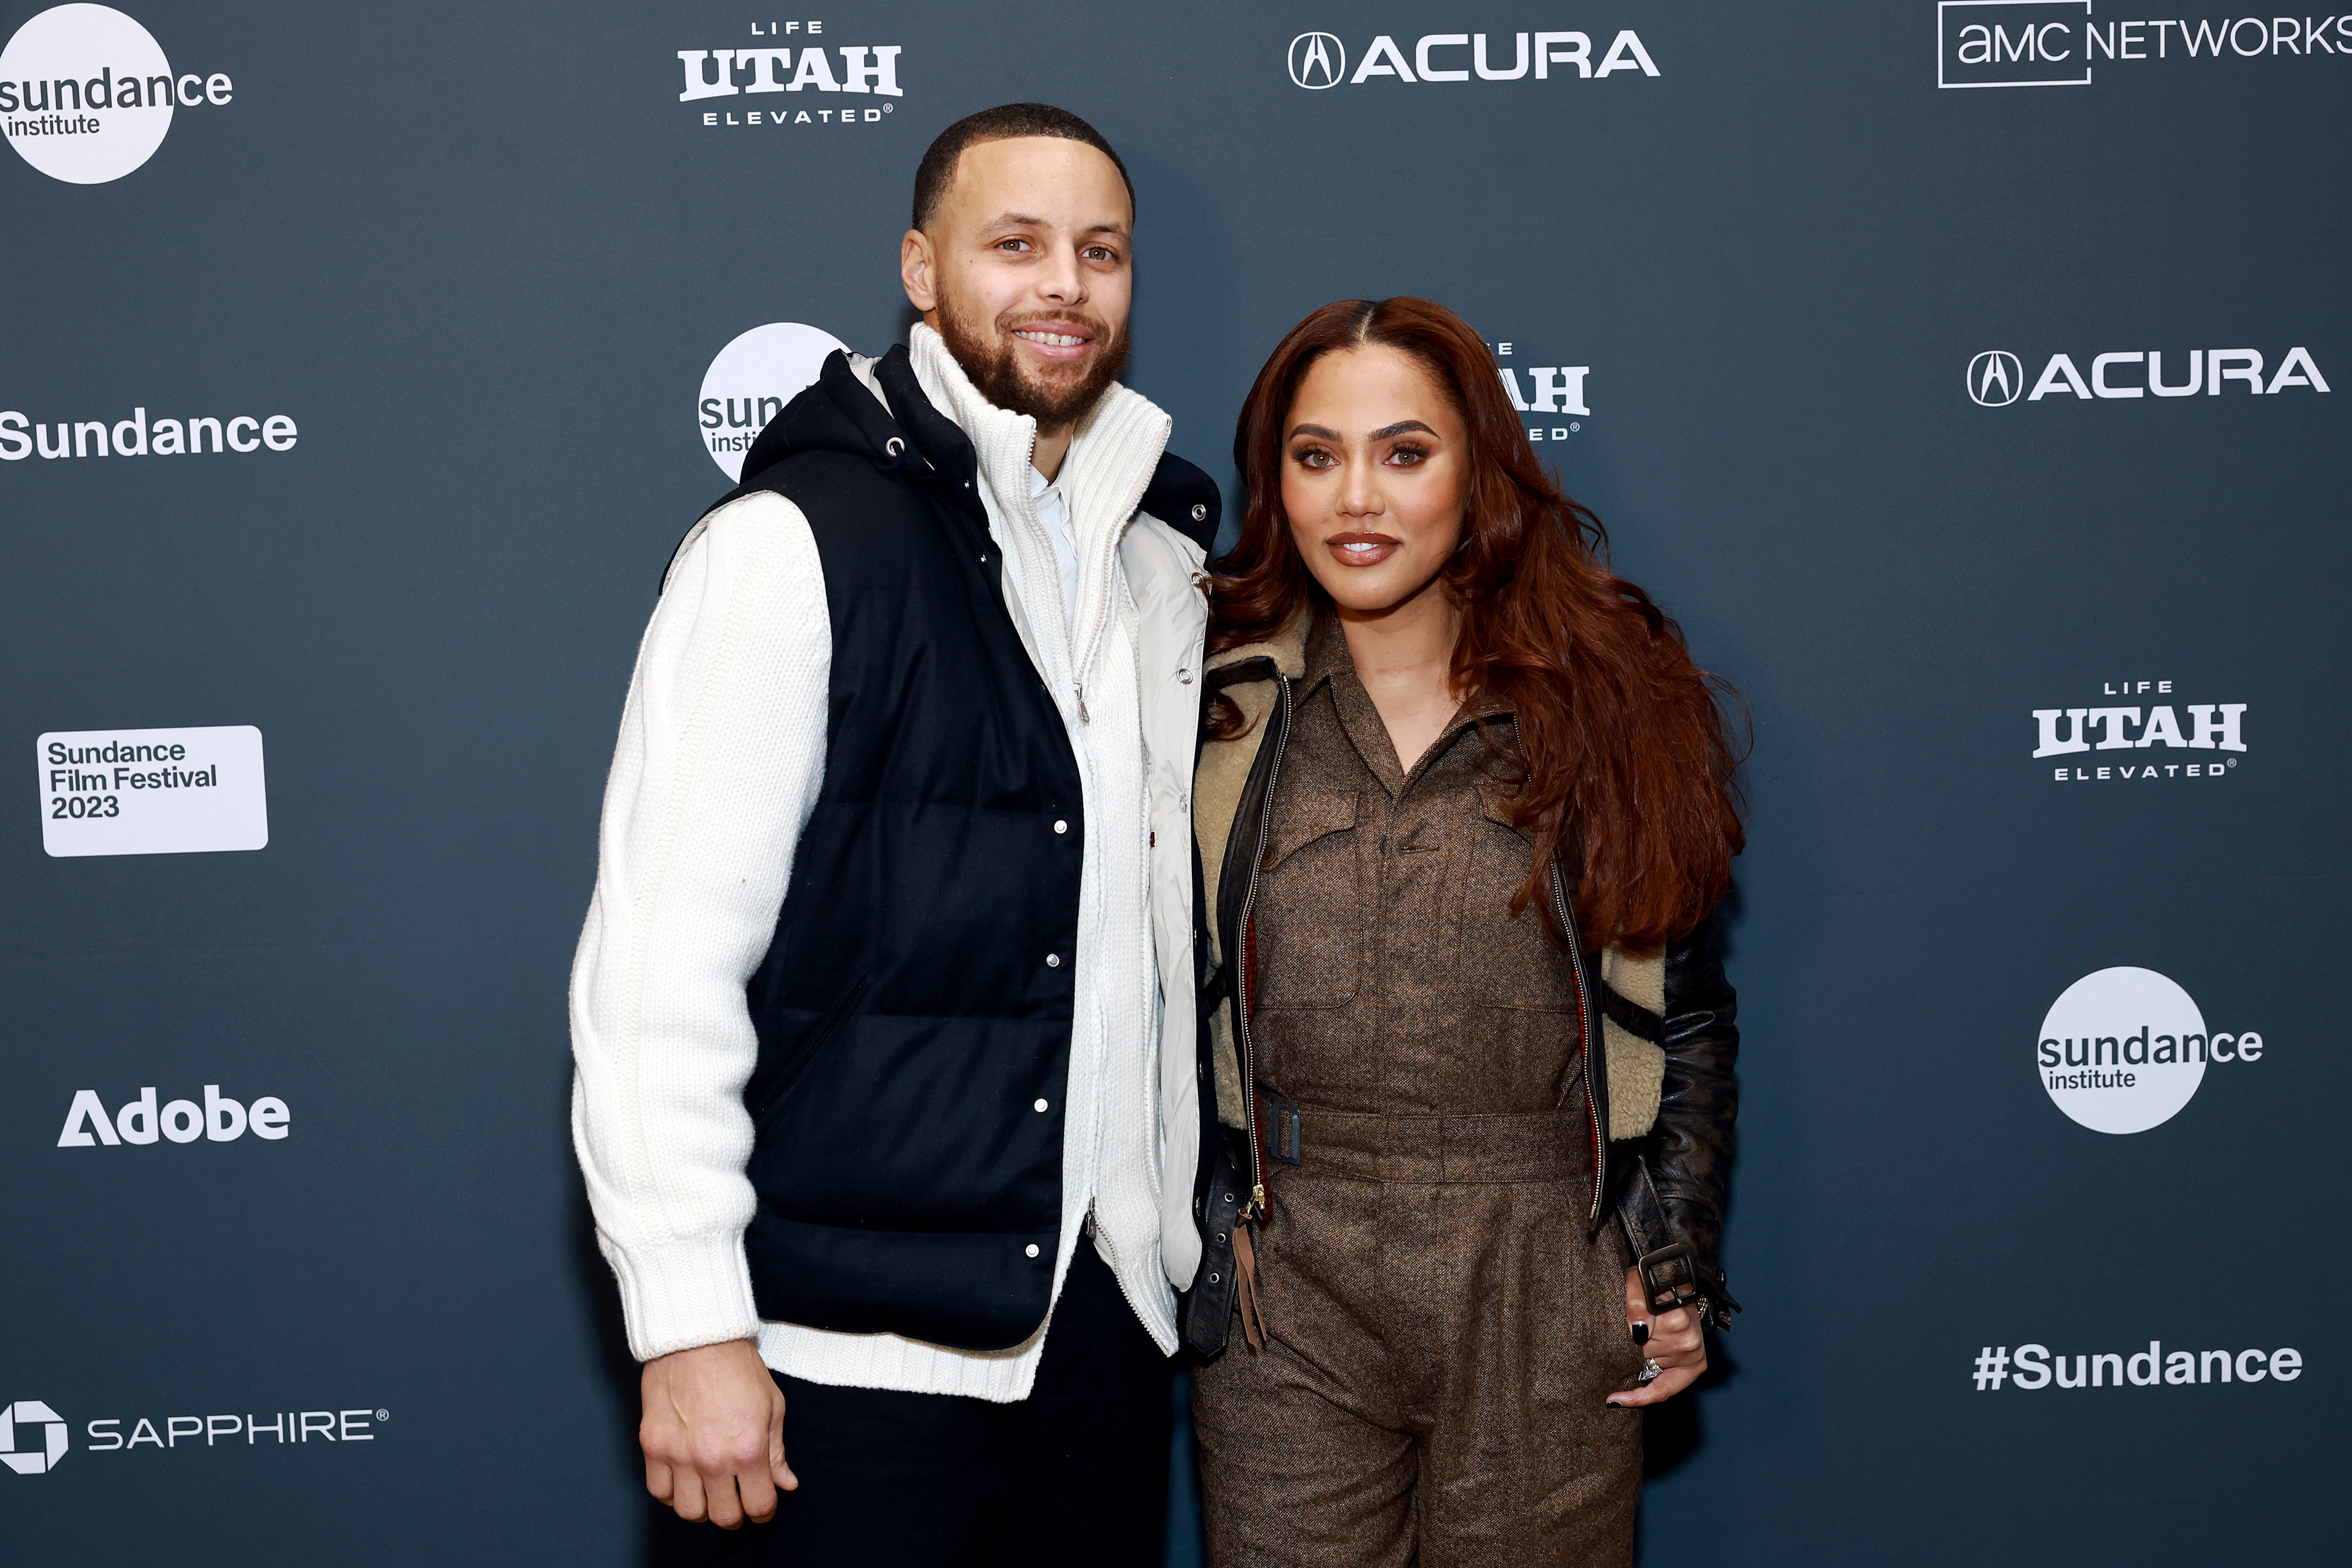 Stephen Curry and his wife Ayesha smile for photographers at a media event